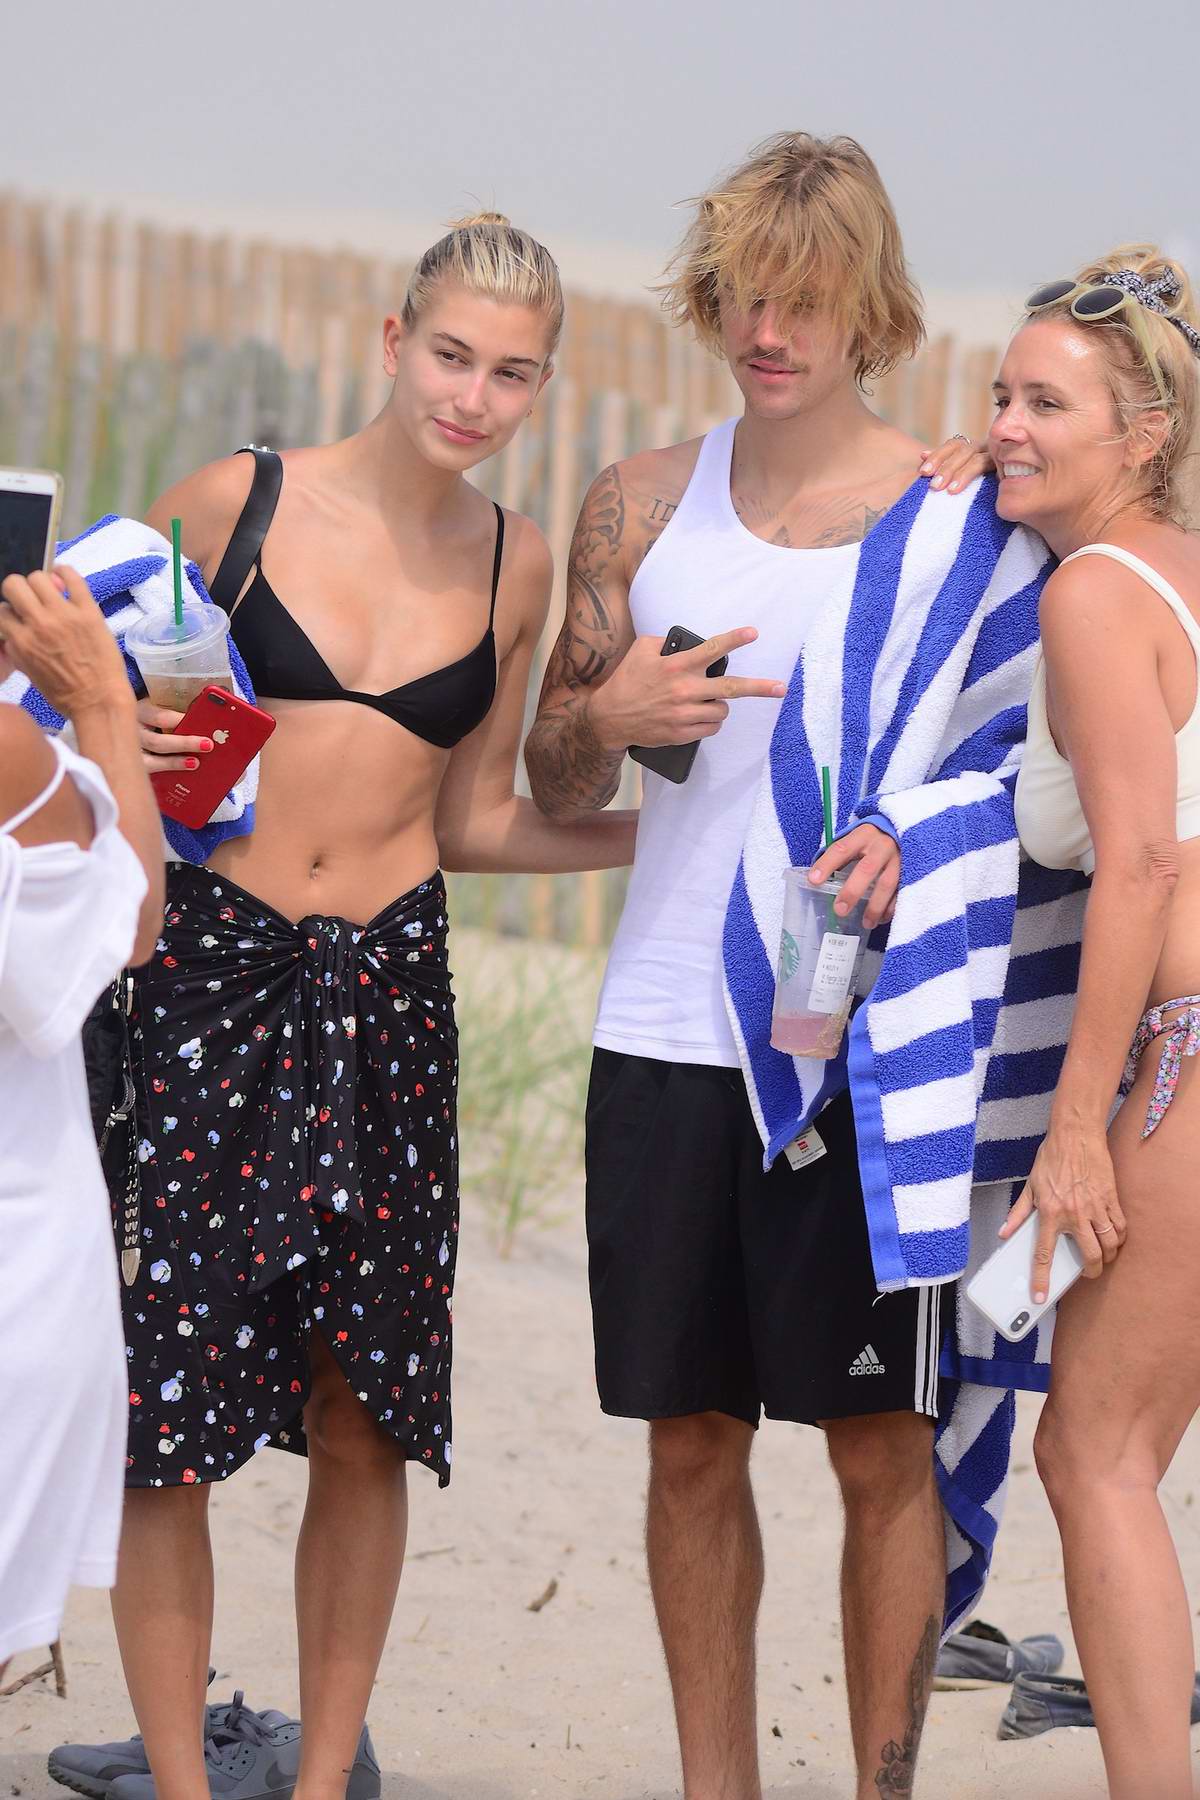 Hailey Baldwin With Justin Bieber in the Hamptons July 2, 2018 – Star Style